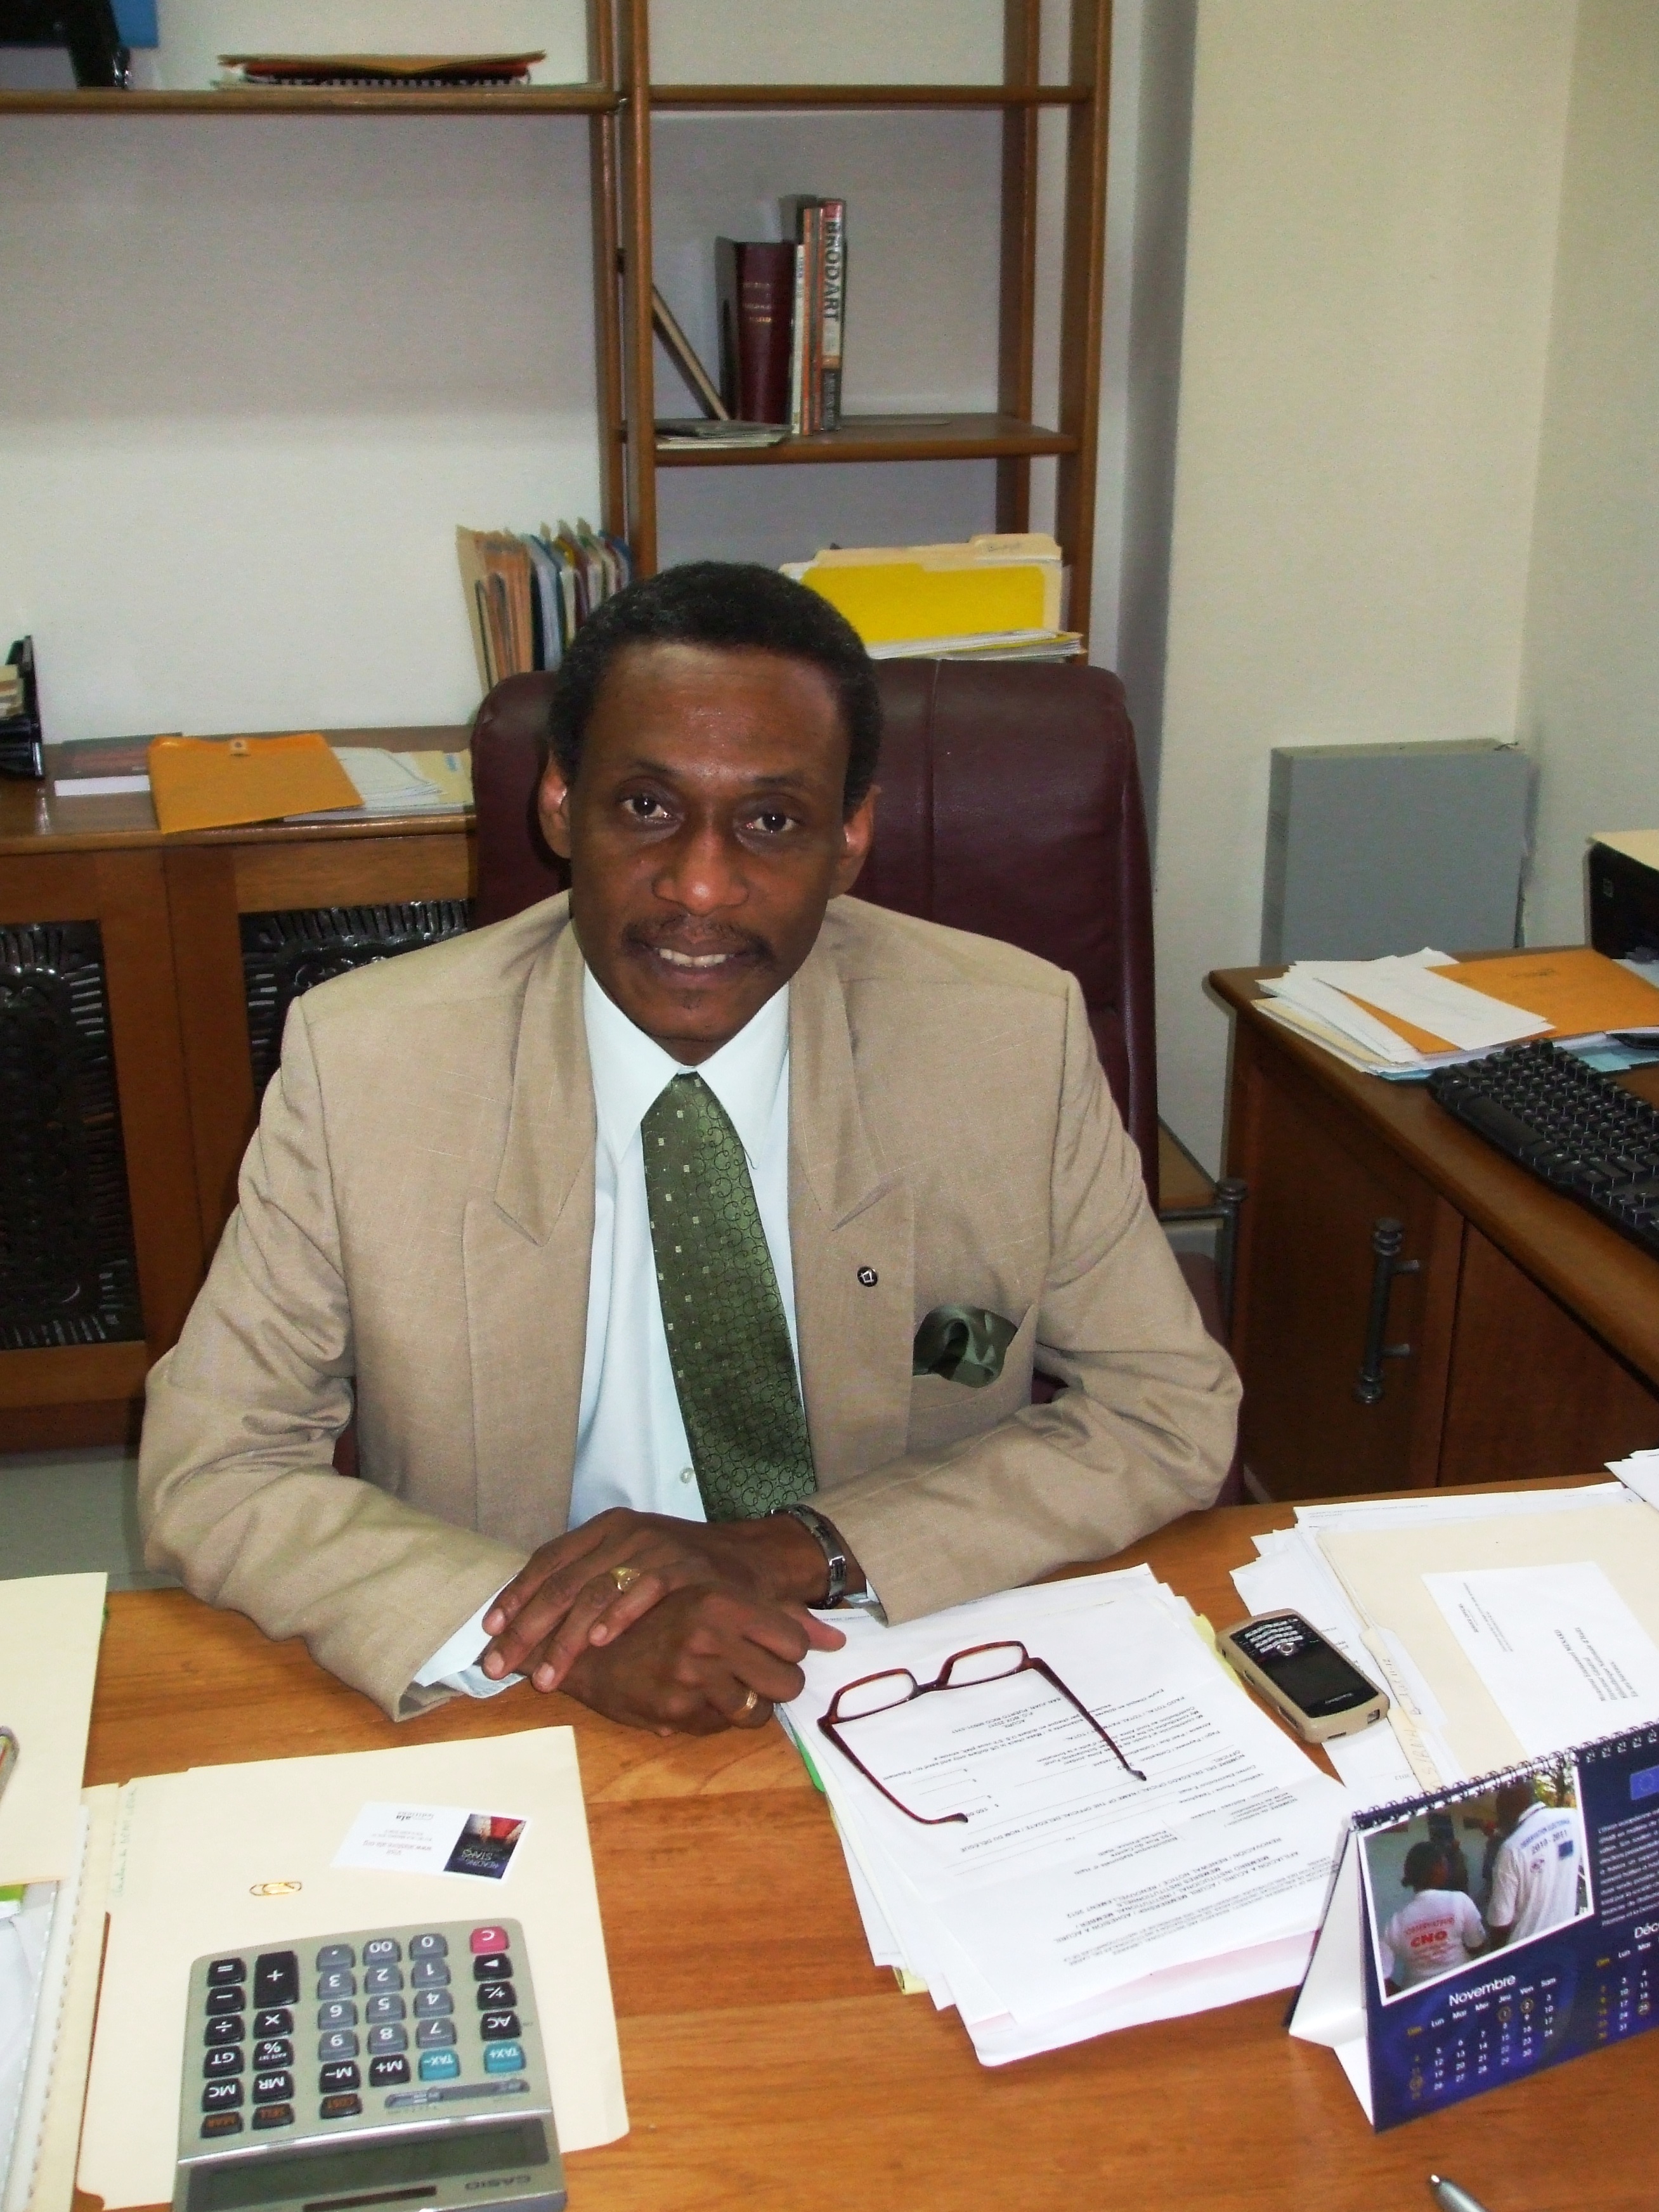 Bibliothèque Nationale Director General Emmanuel Menard oversees library affairs from his office in Port-au-Prince.